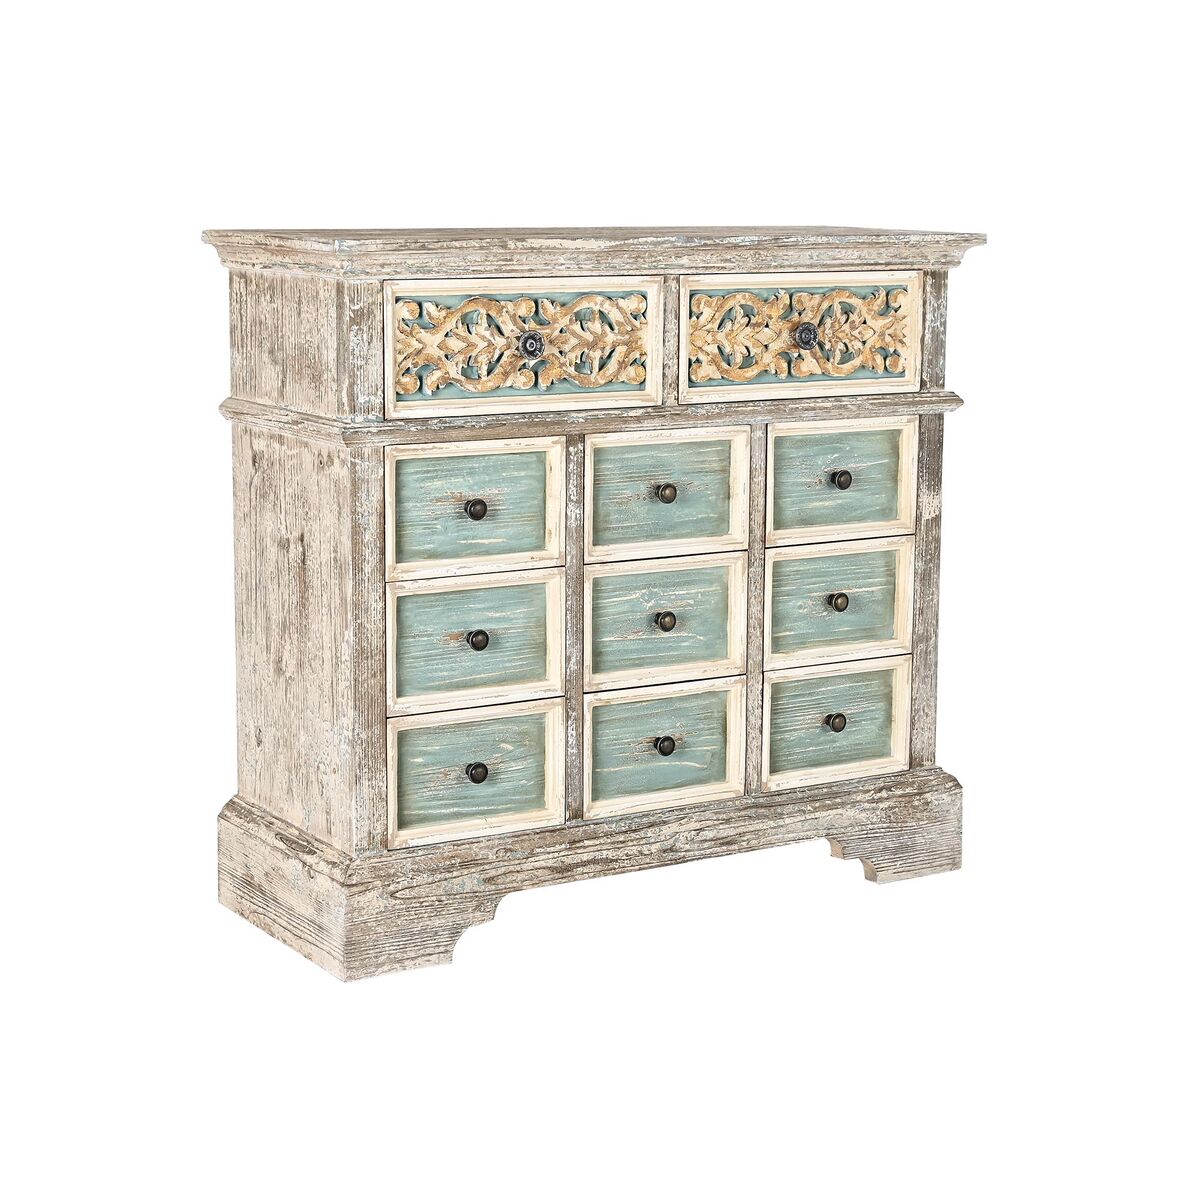 White Turquoise Chest of drawers in Wood and Oriental Style (99 x 38 x 91 cm)